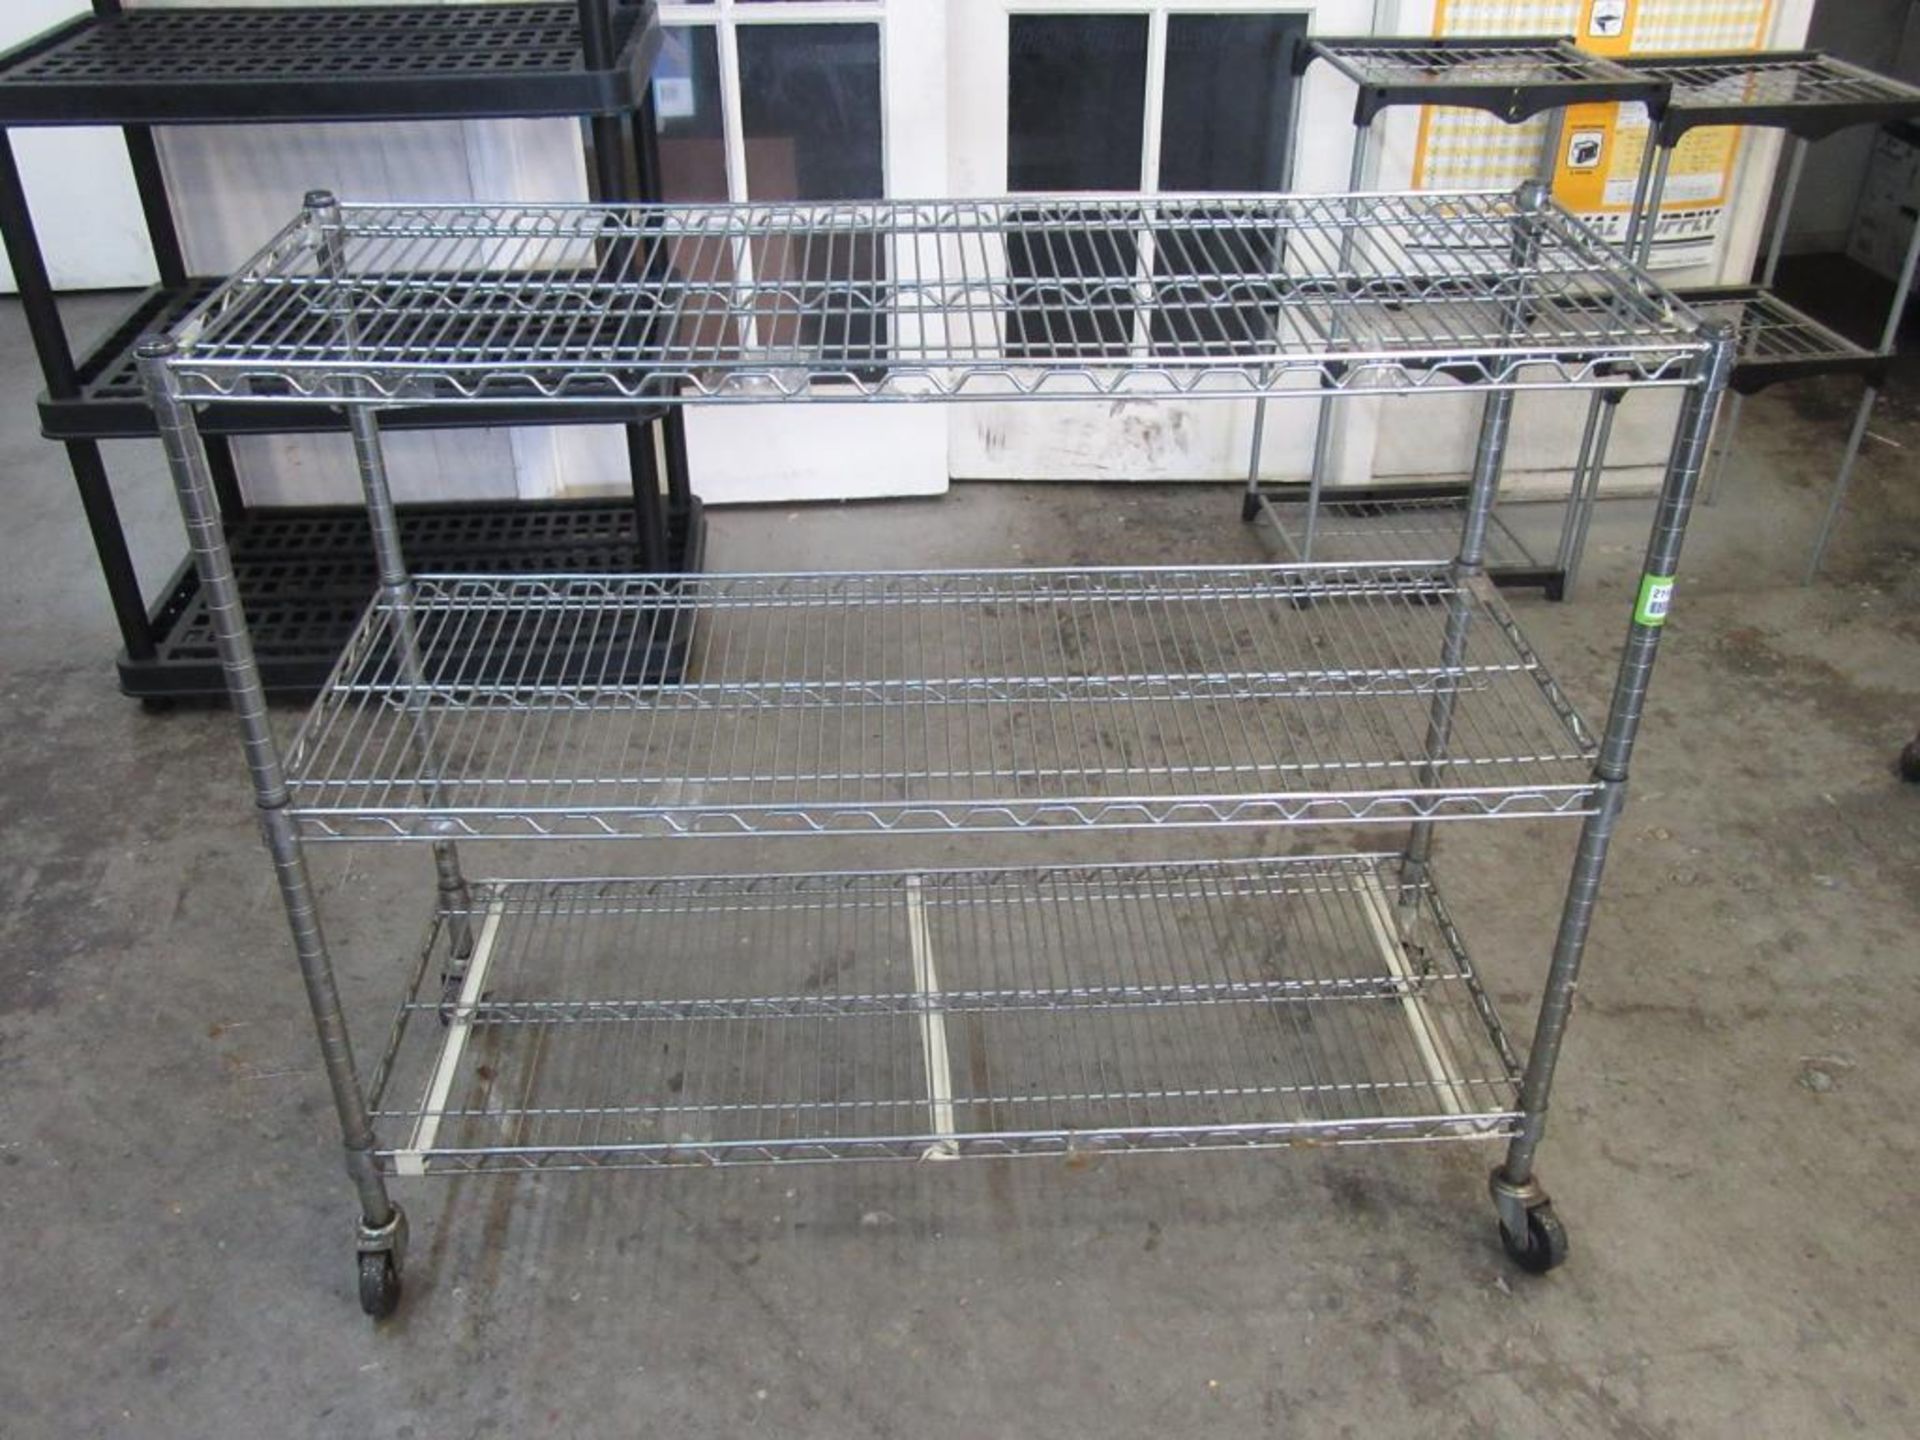 Seville Classics 3-Tier Wire Shelf Cart 48"L x 40"H x 18"W. HIT# 2194900. Asset(s) Located at